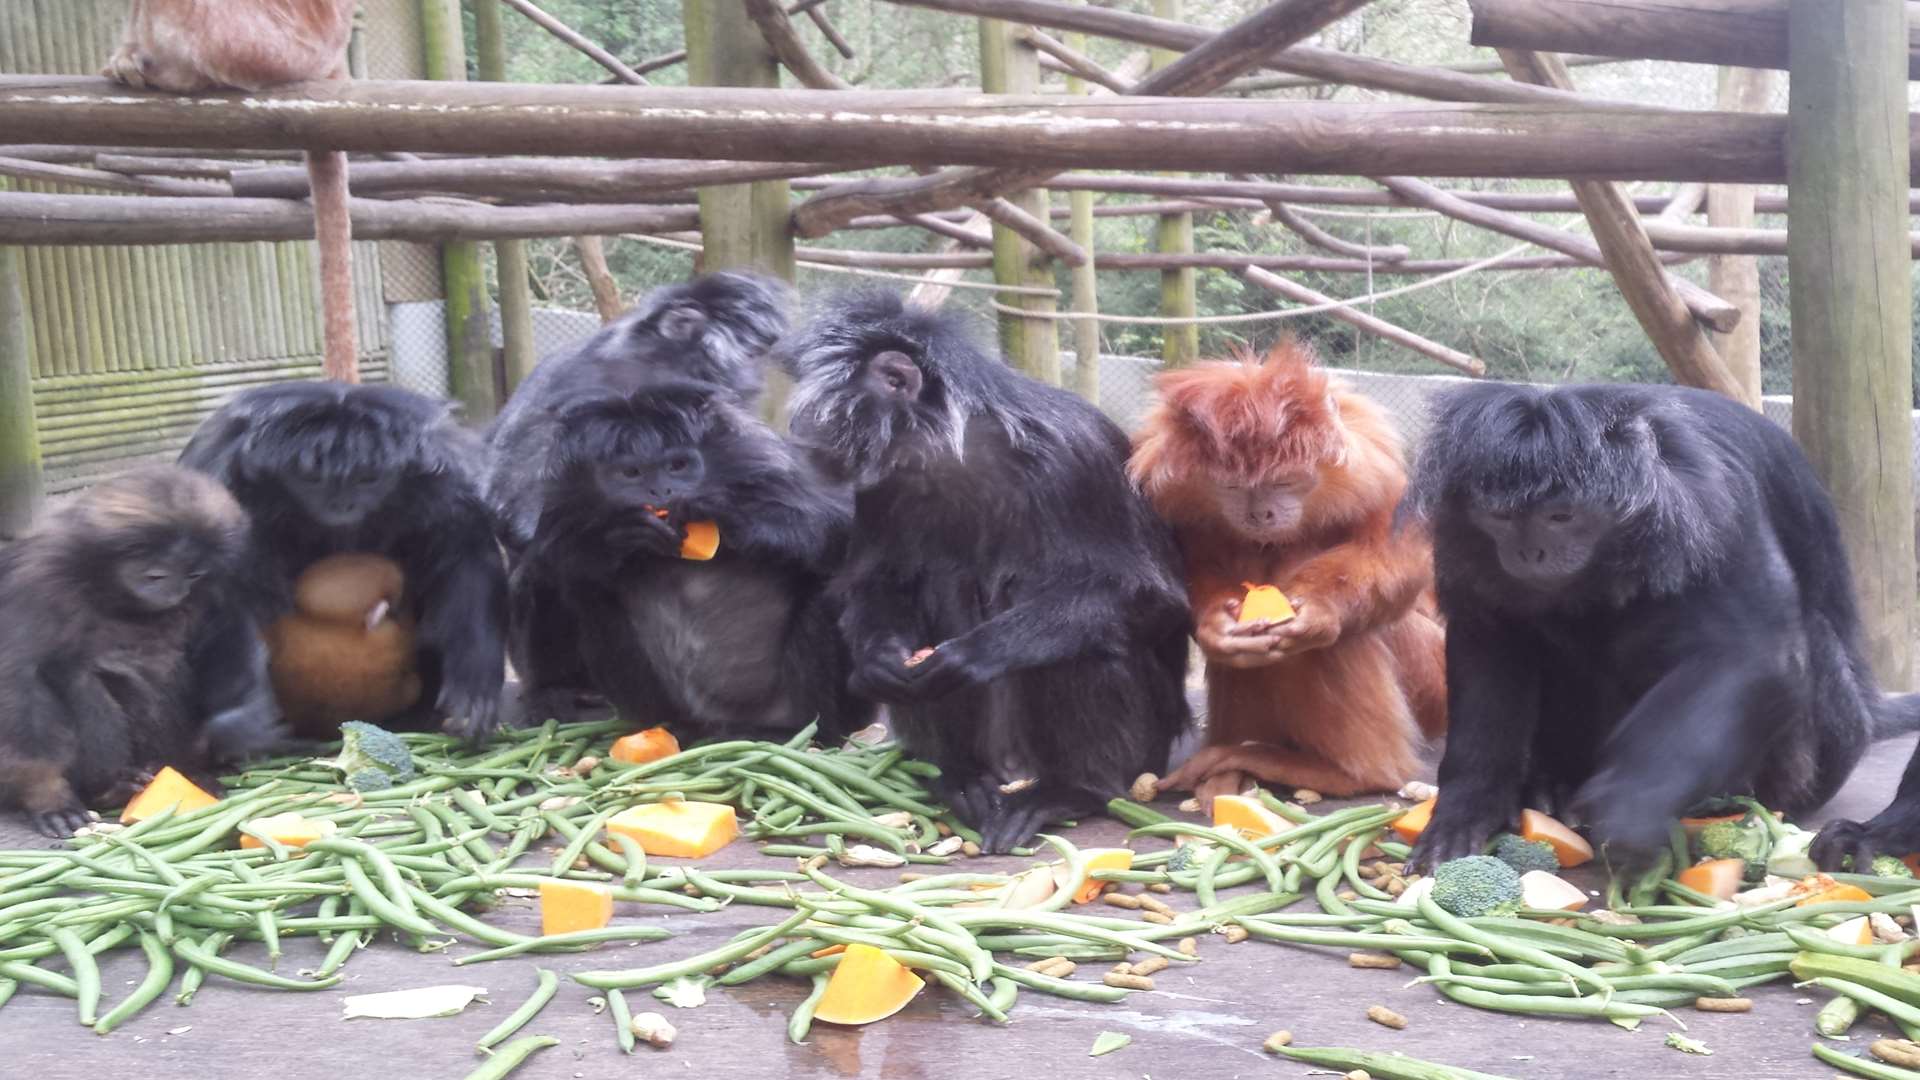 The langurs have been returned to their Indonesian habitat by the Aspinall Foundation. Picture: Aspinall Foundation